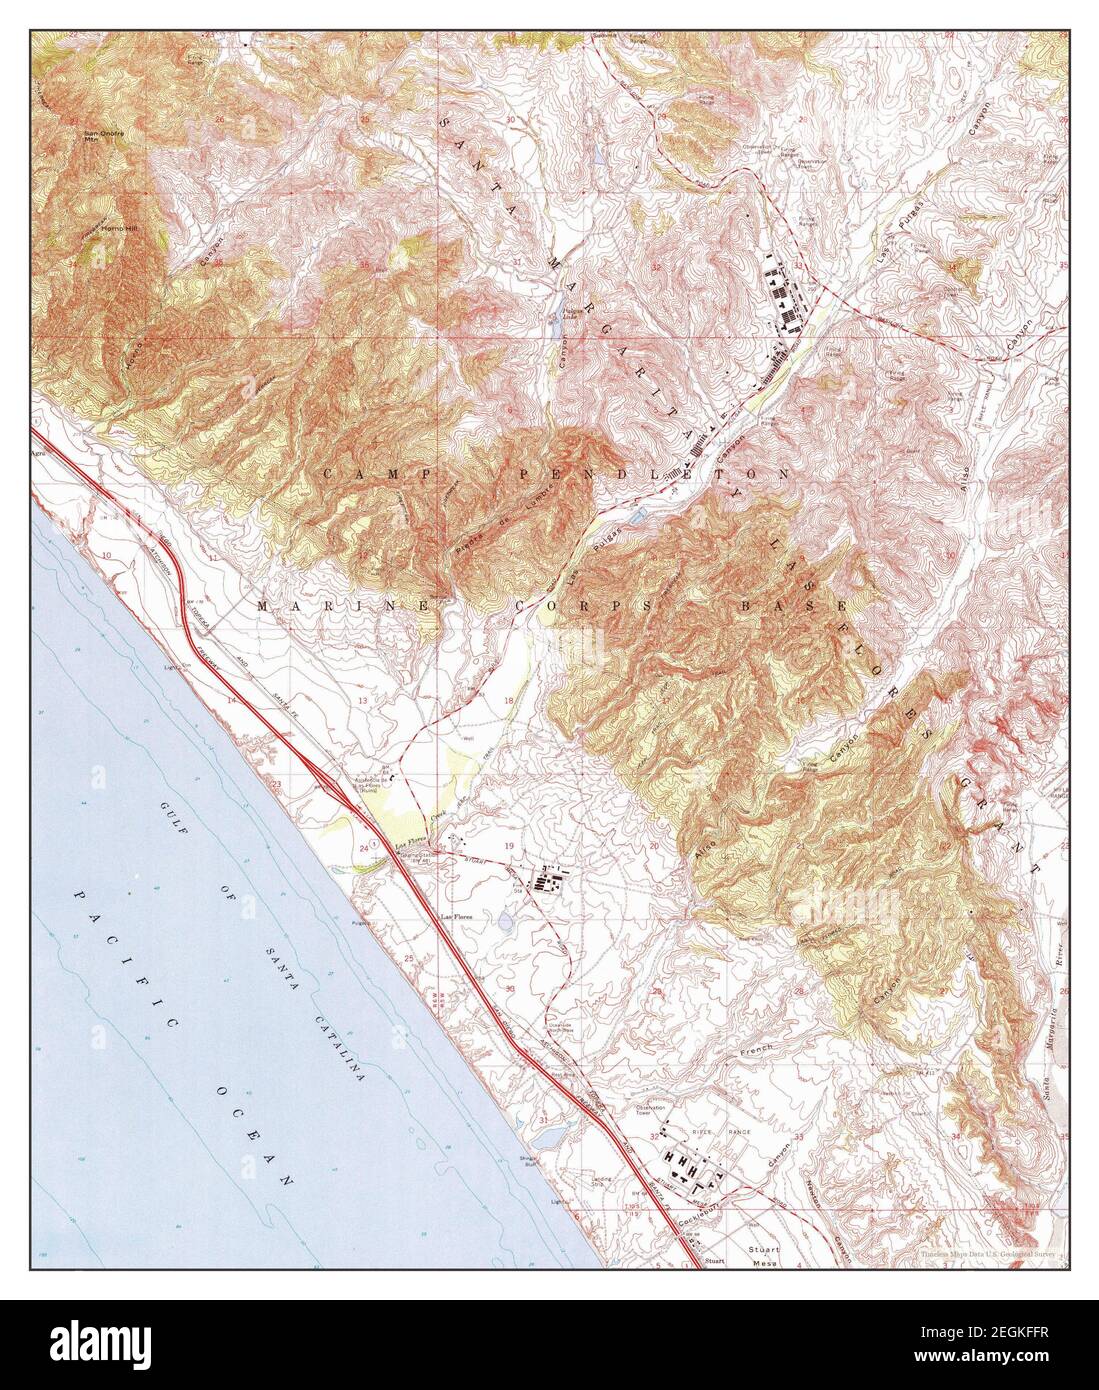 Las Pulgas Canyon, California, map 1968, 1:24000, United States of America by Timeless Maps, data U.S. Geological Survey Stock Photo